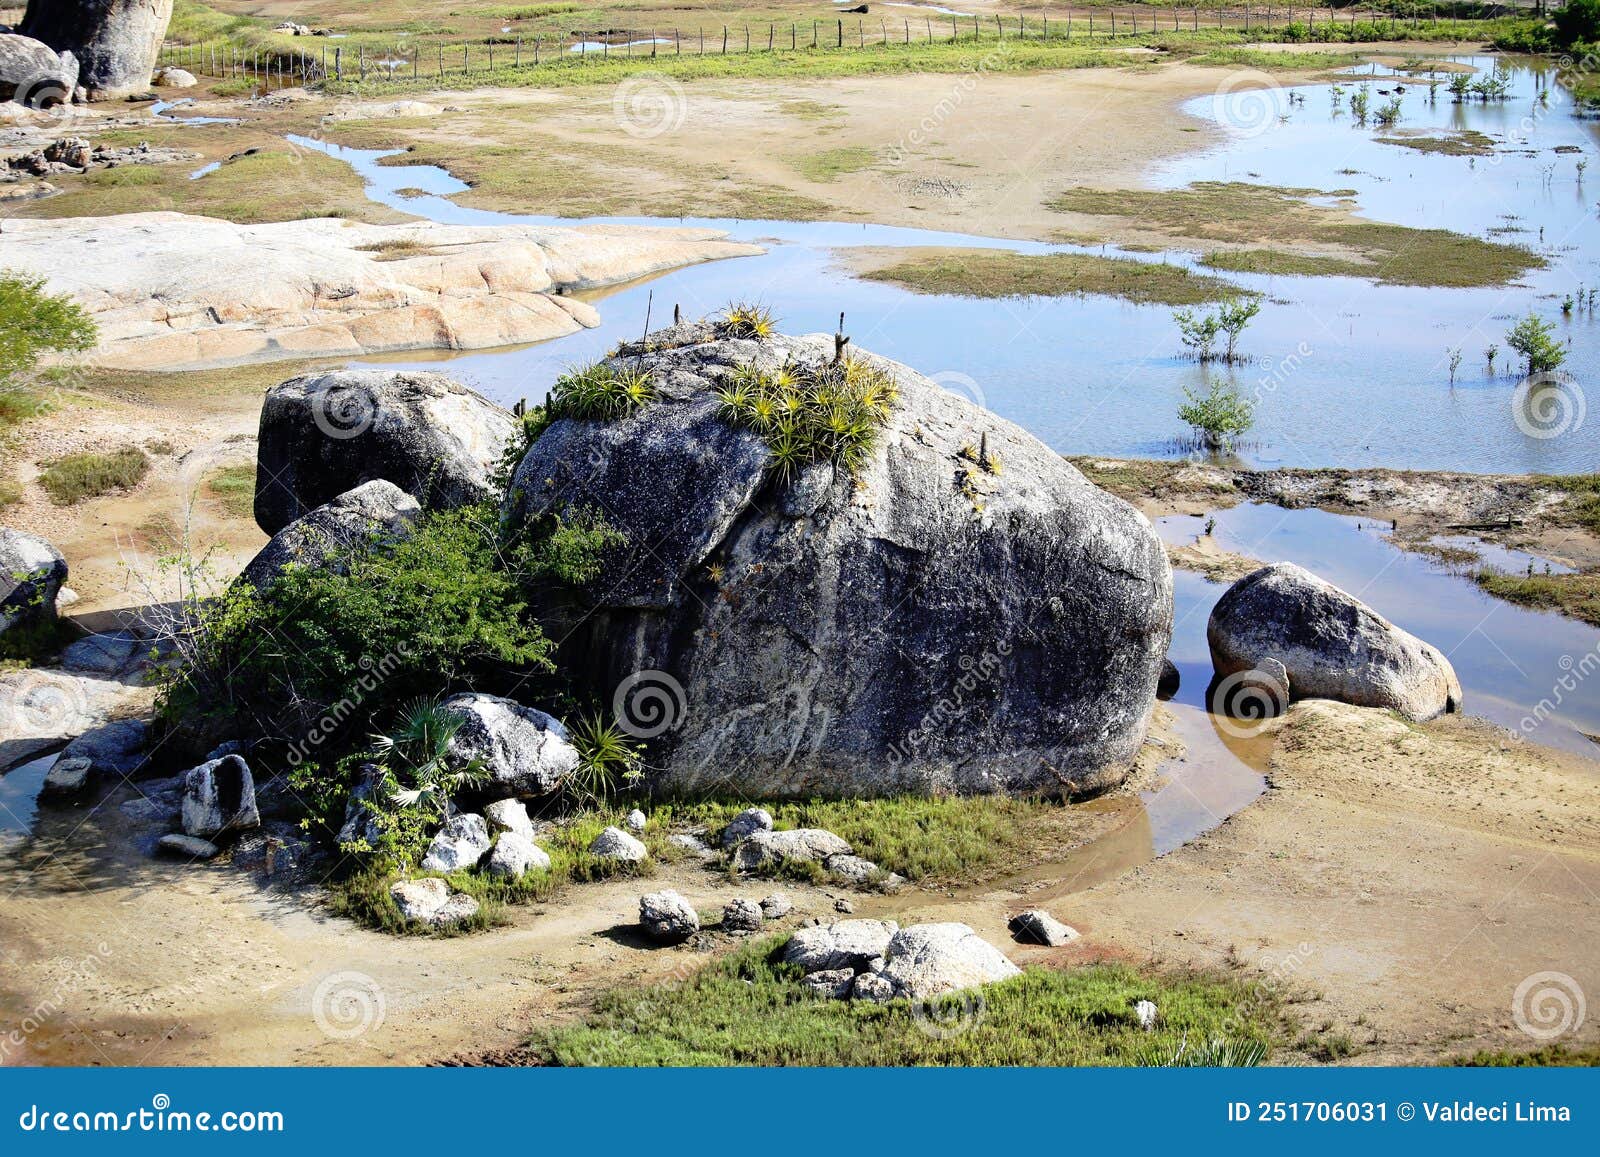 big rocks and undergrowth with some vegetation in the region close to the sea, northeast of brazil.